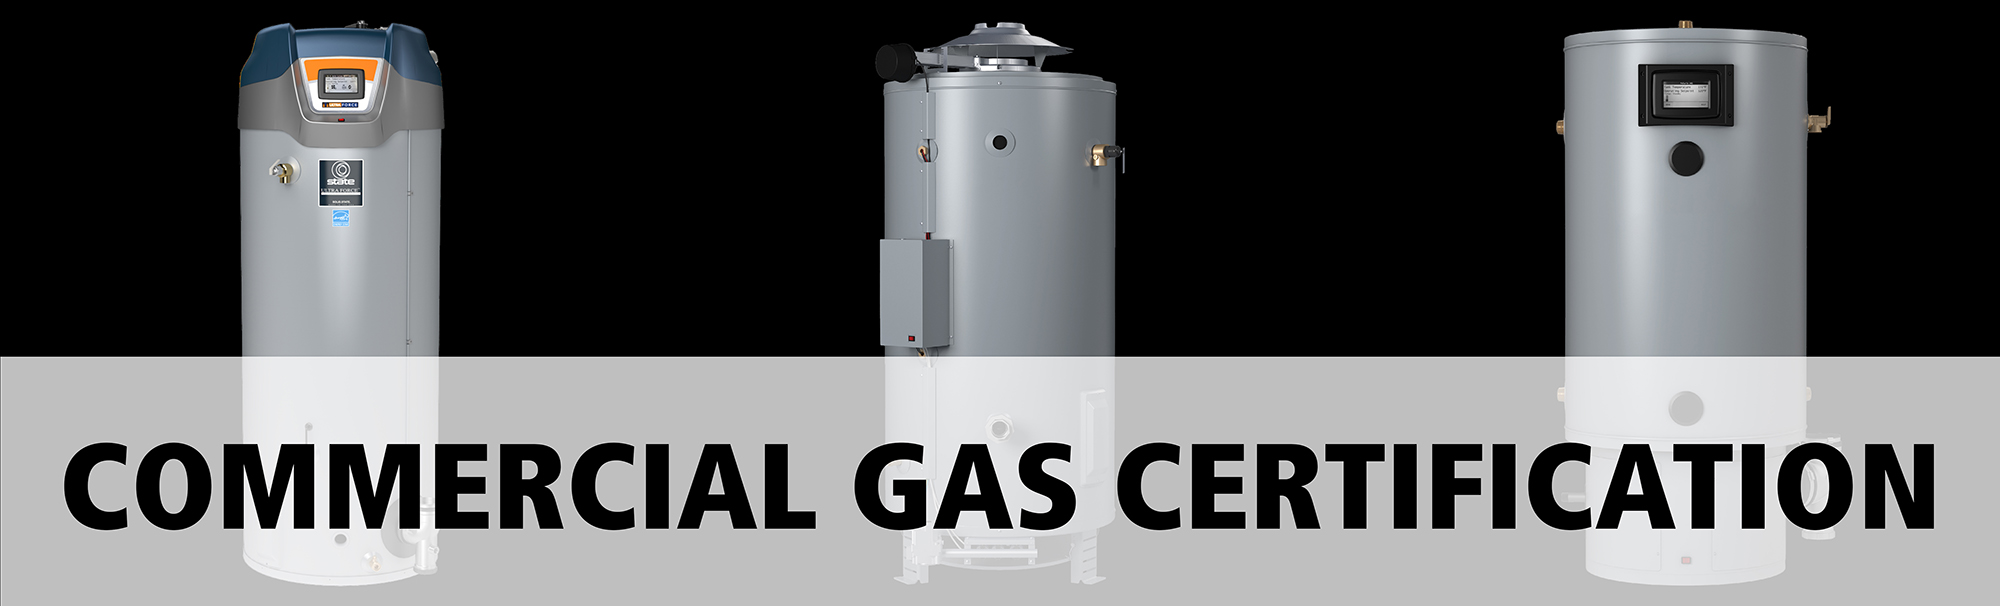 Commercial Gas Certification